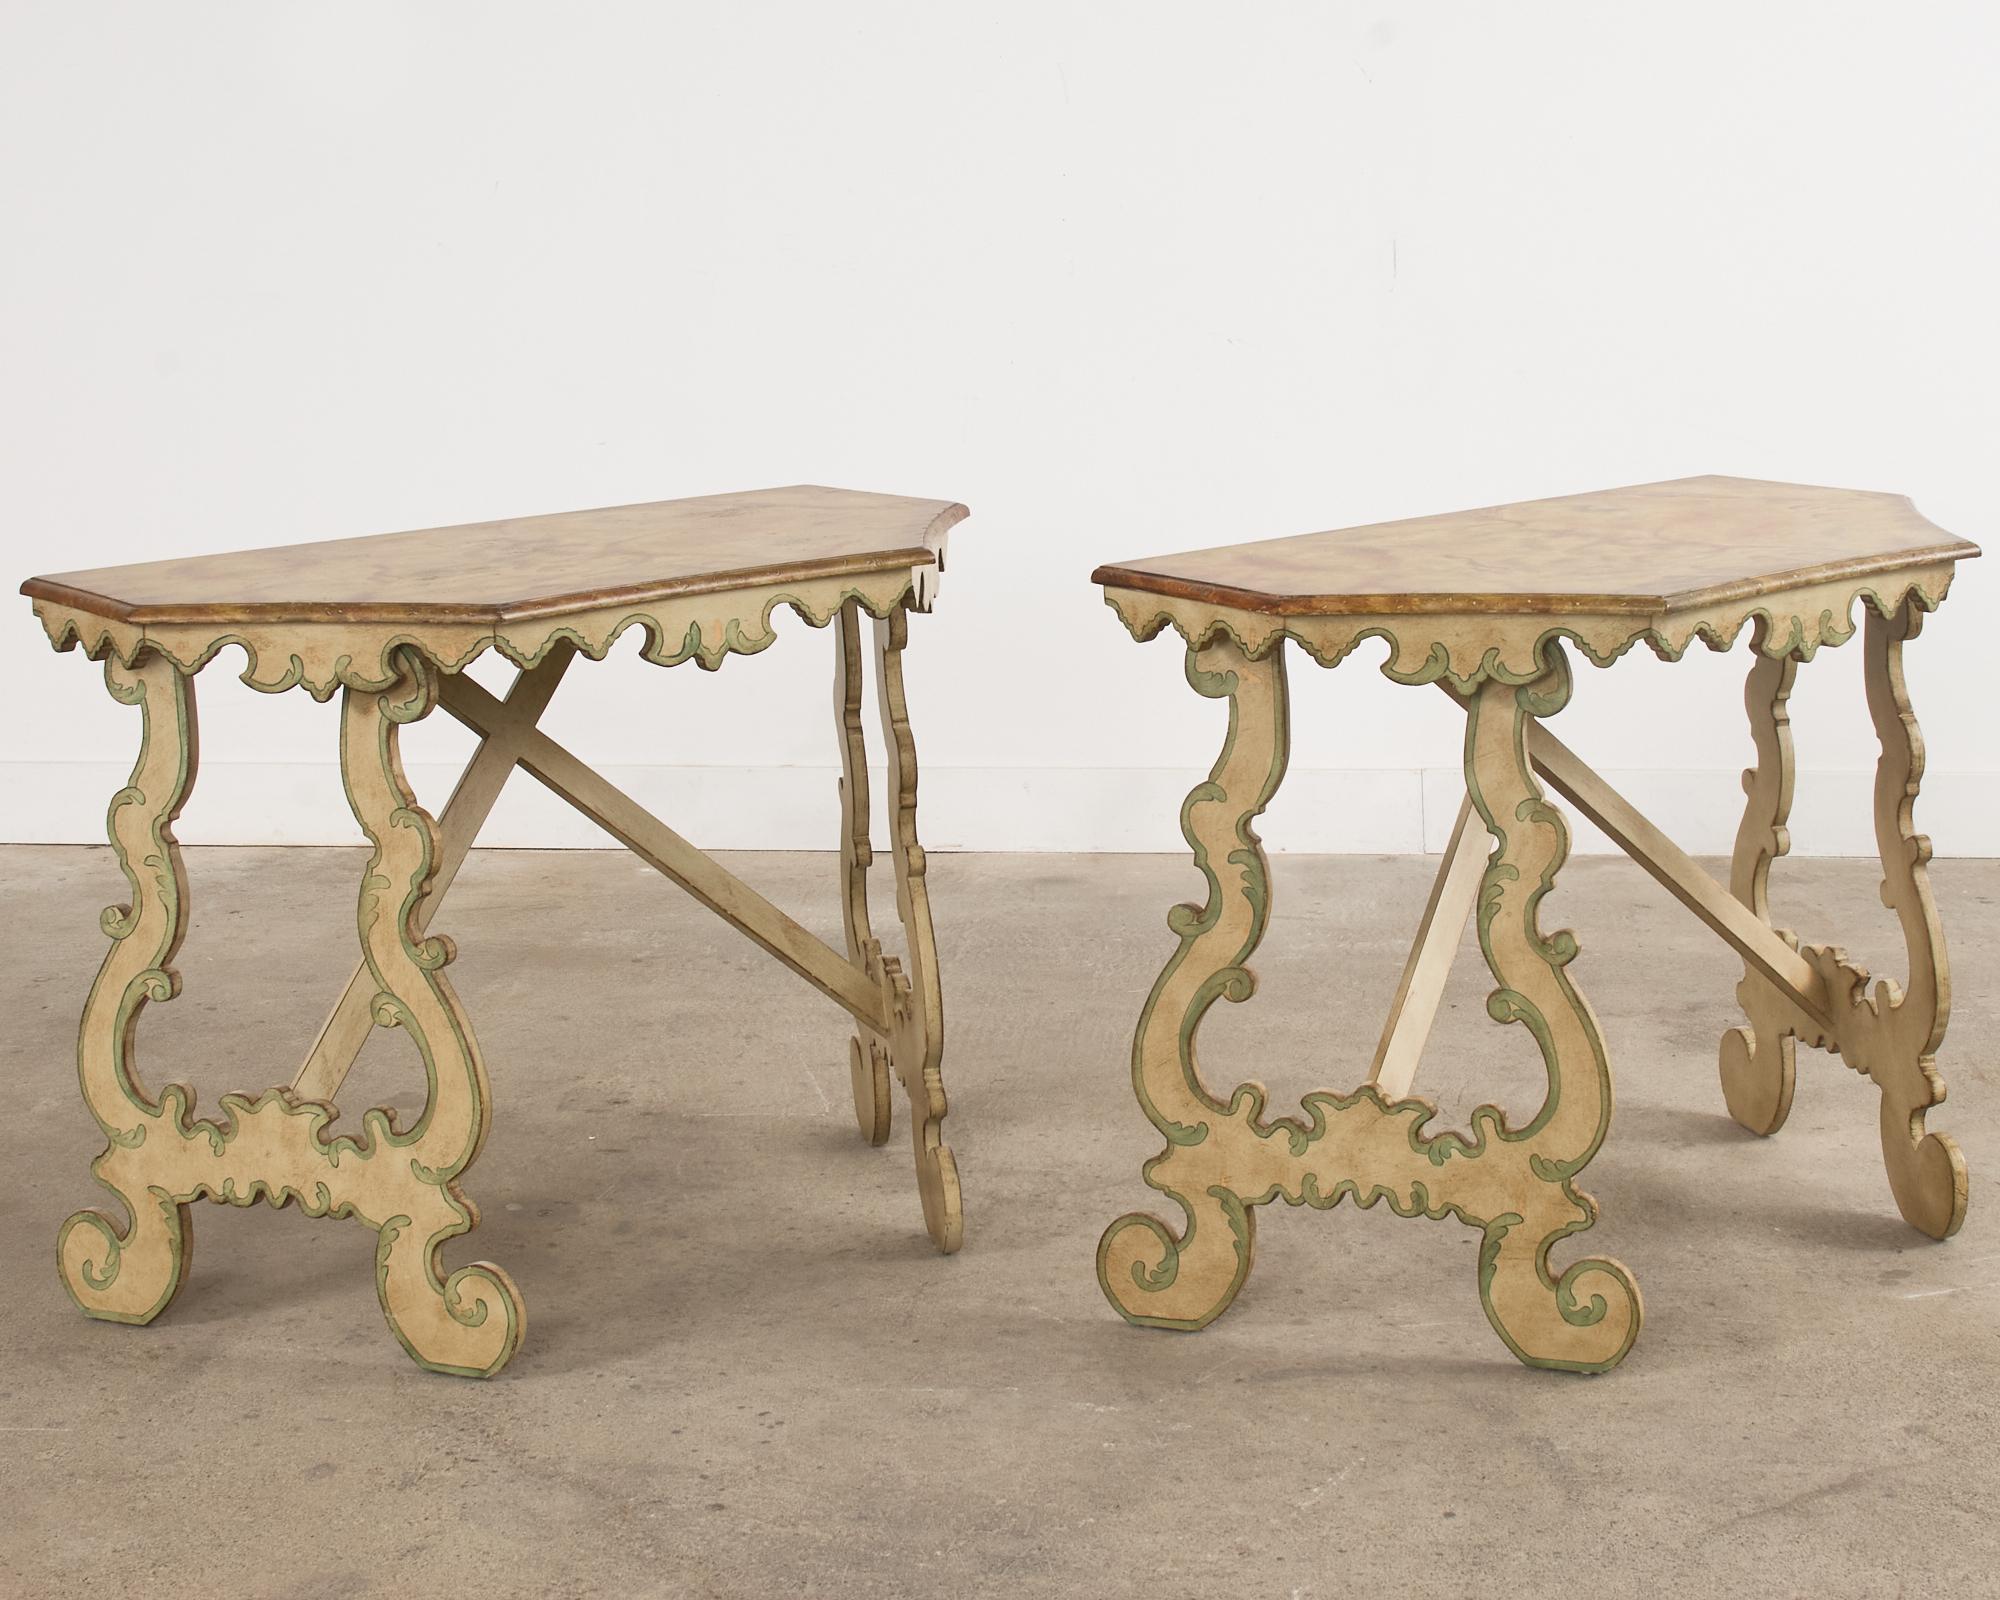 20th Century Pair of Italian Baroque Style Painted Faux Marble Top Consoles For Sale